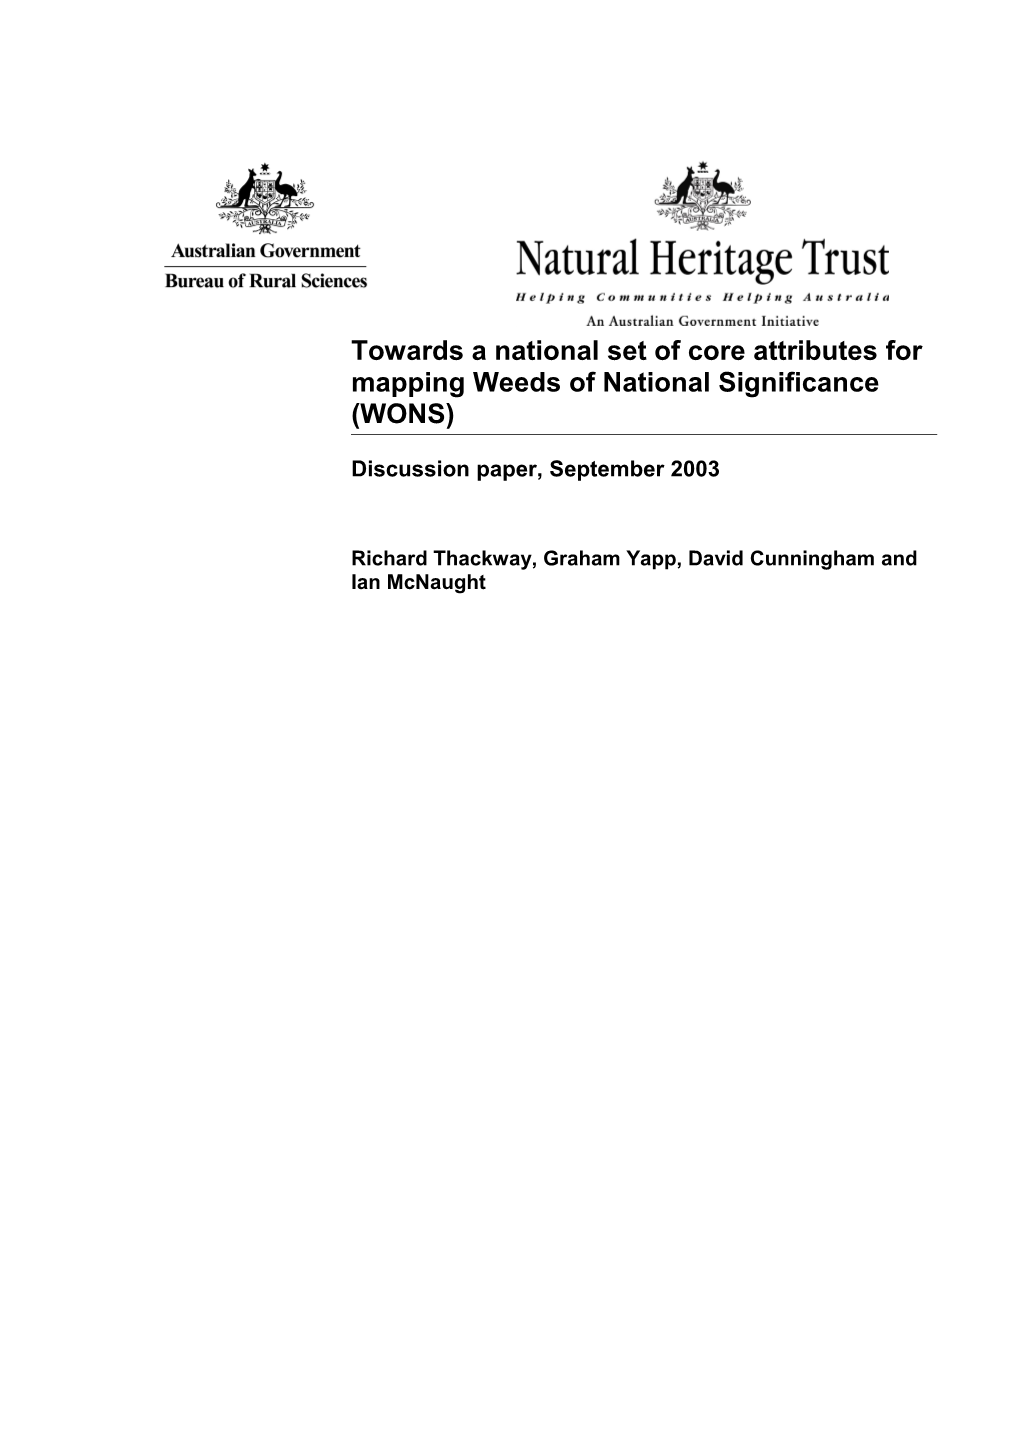 Towards a National Set of Core Attributes for Mapping Weeds of National Significance